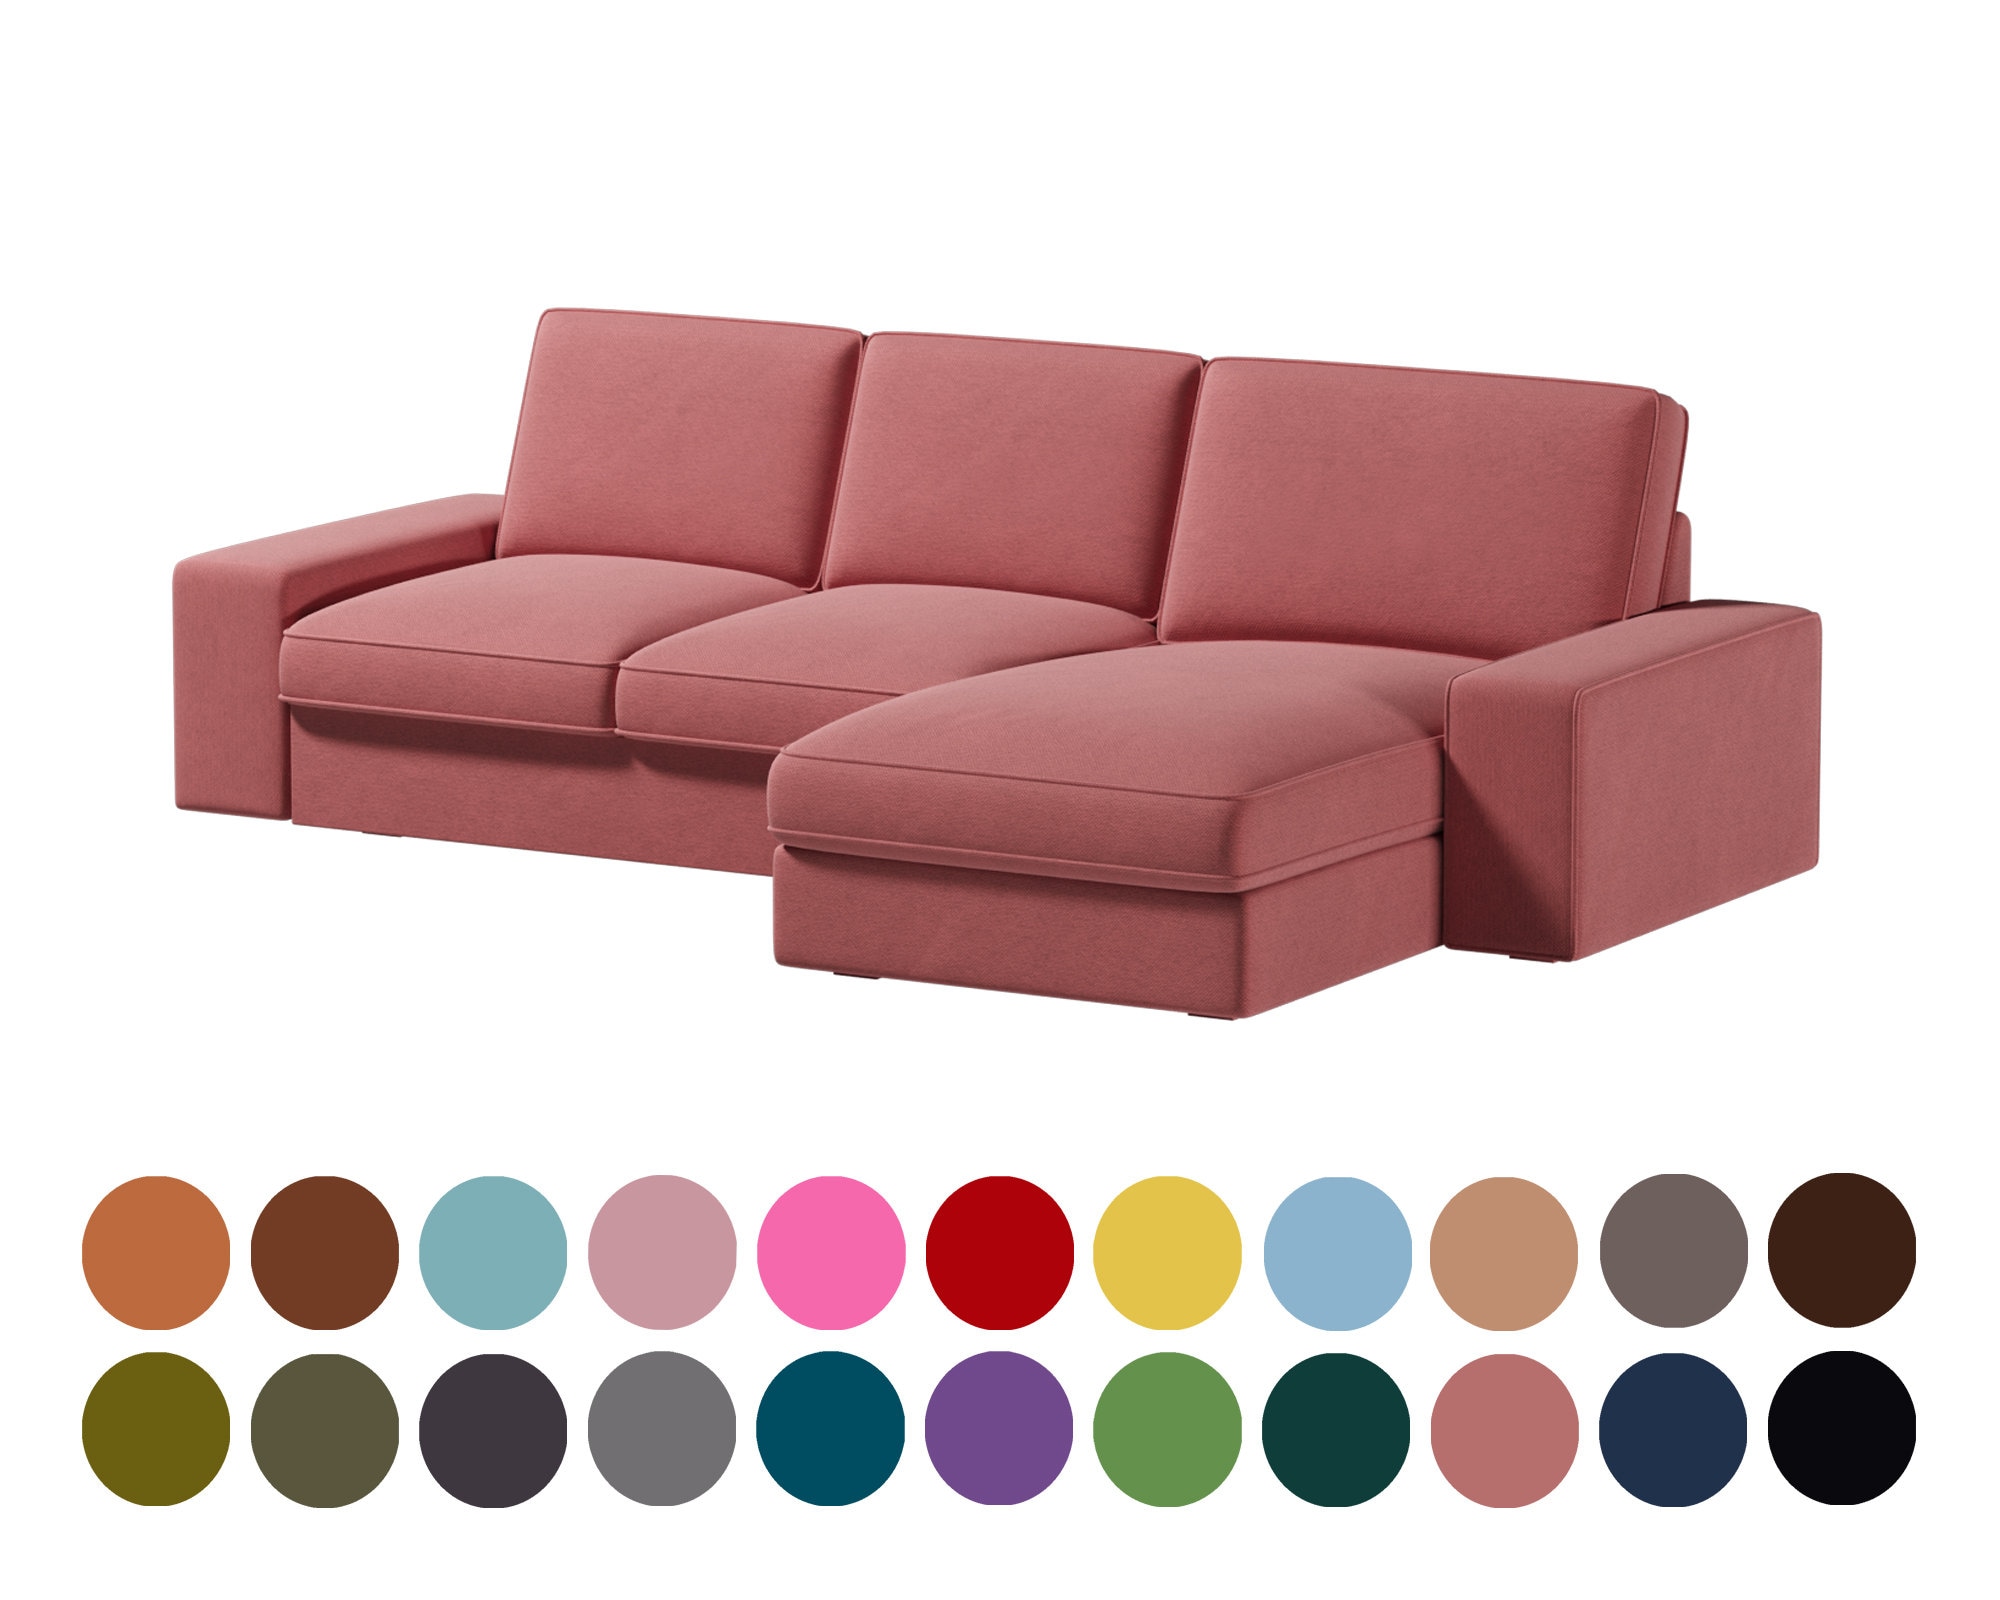 Custom Cover Fits Kivik 2 Seat Sofa With Chaise Loungetotal - Etsy